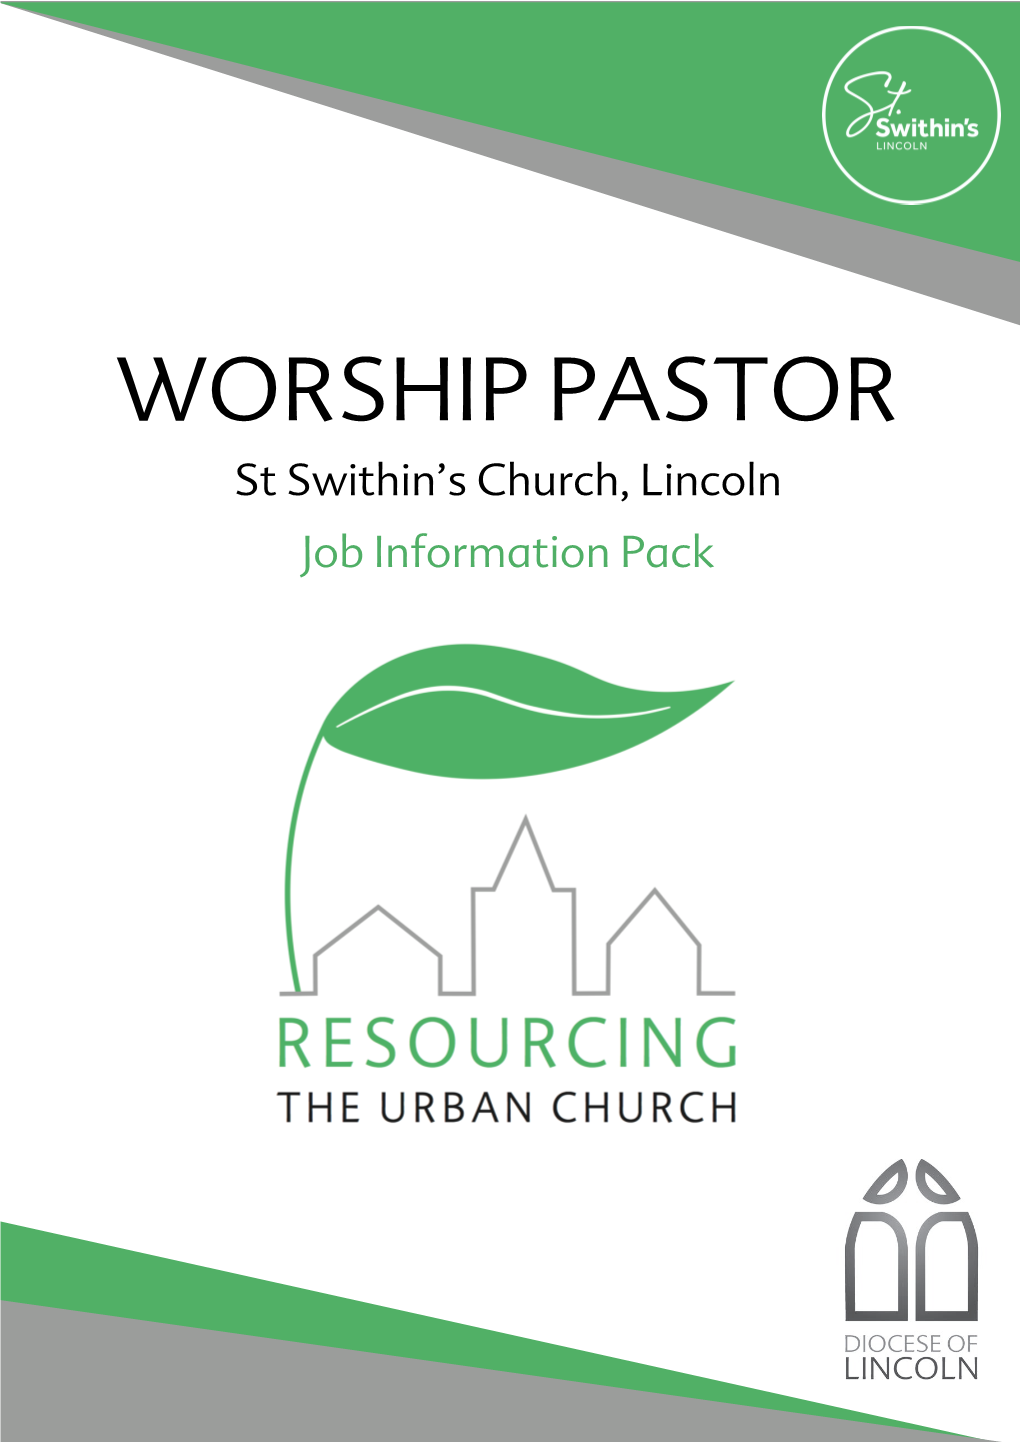 WORSHIP PASTOR St Swithin’S Church, Lincoln Job Information Pack RESOURCING the URBAN CHURCH